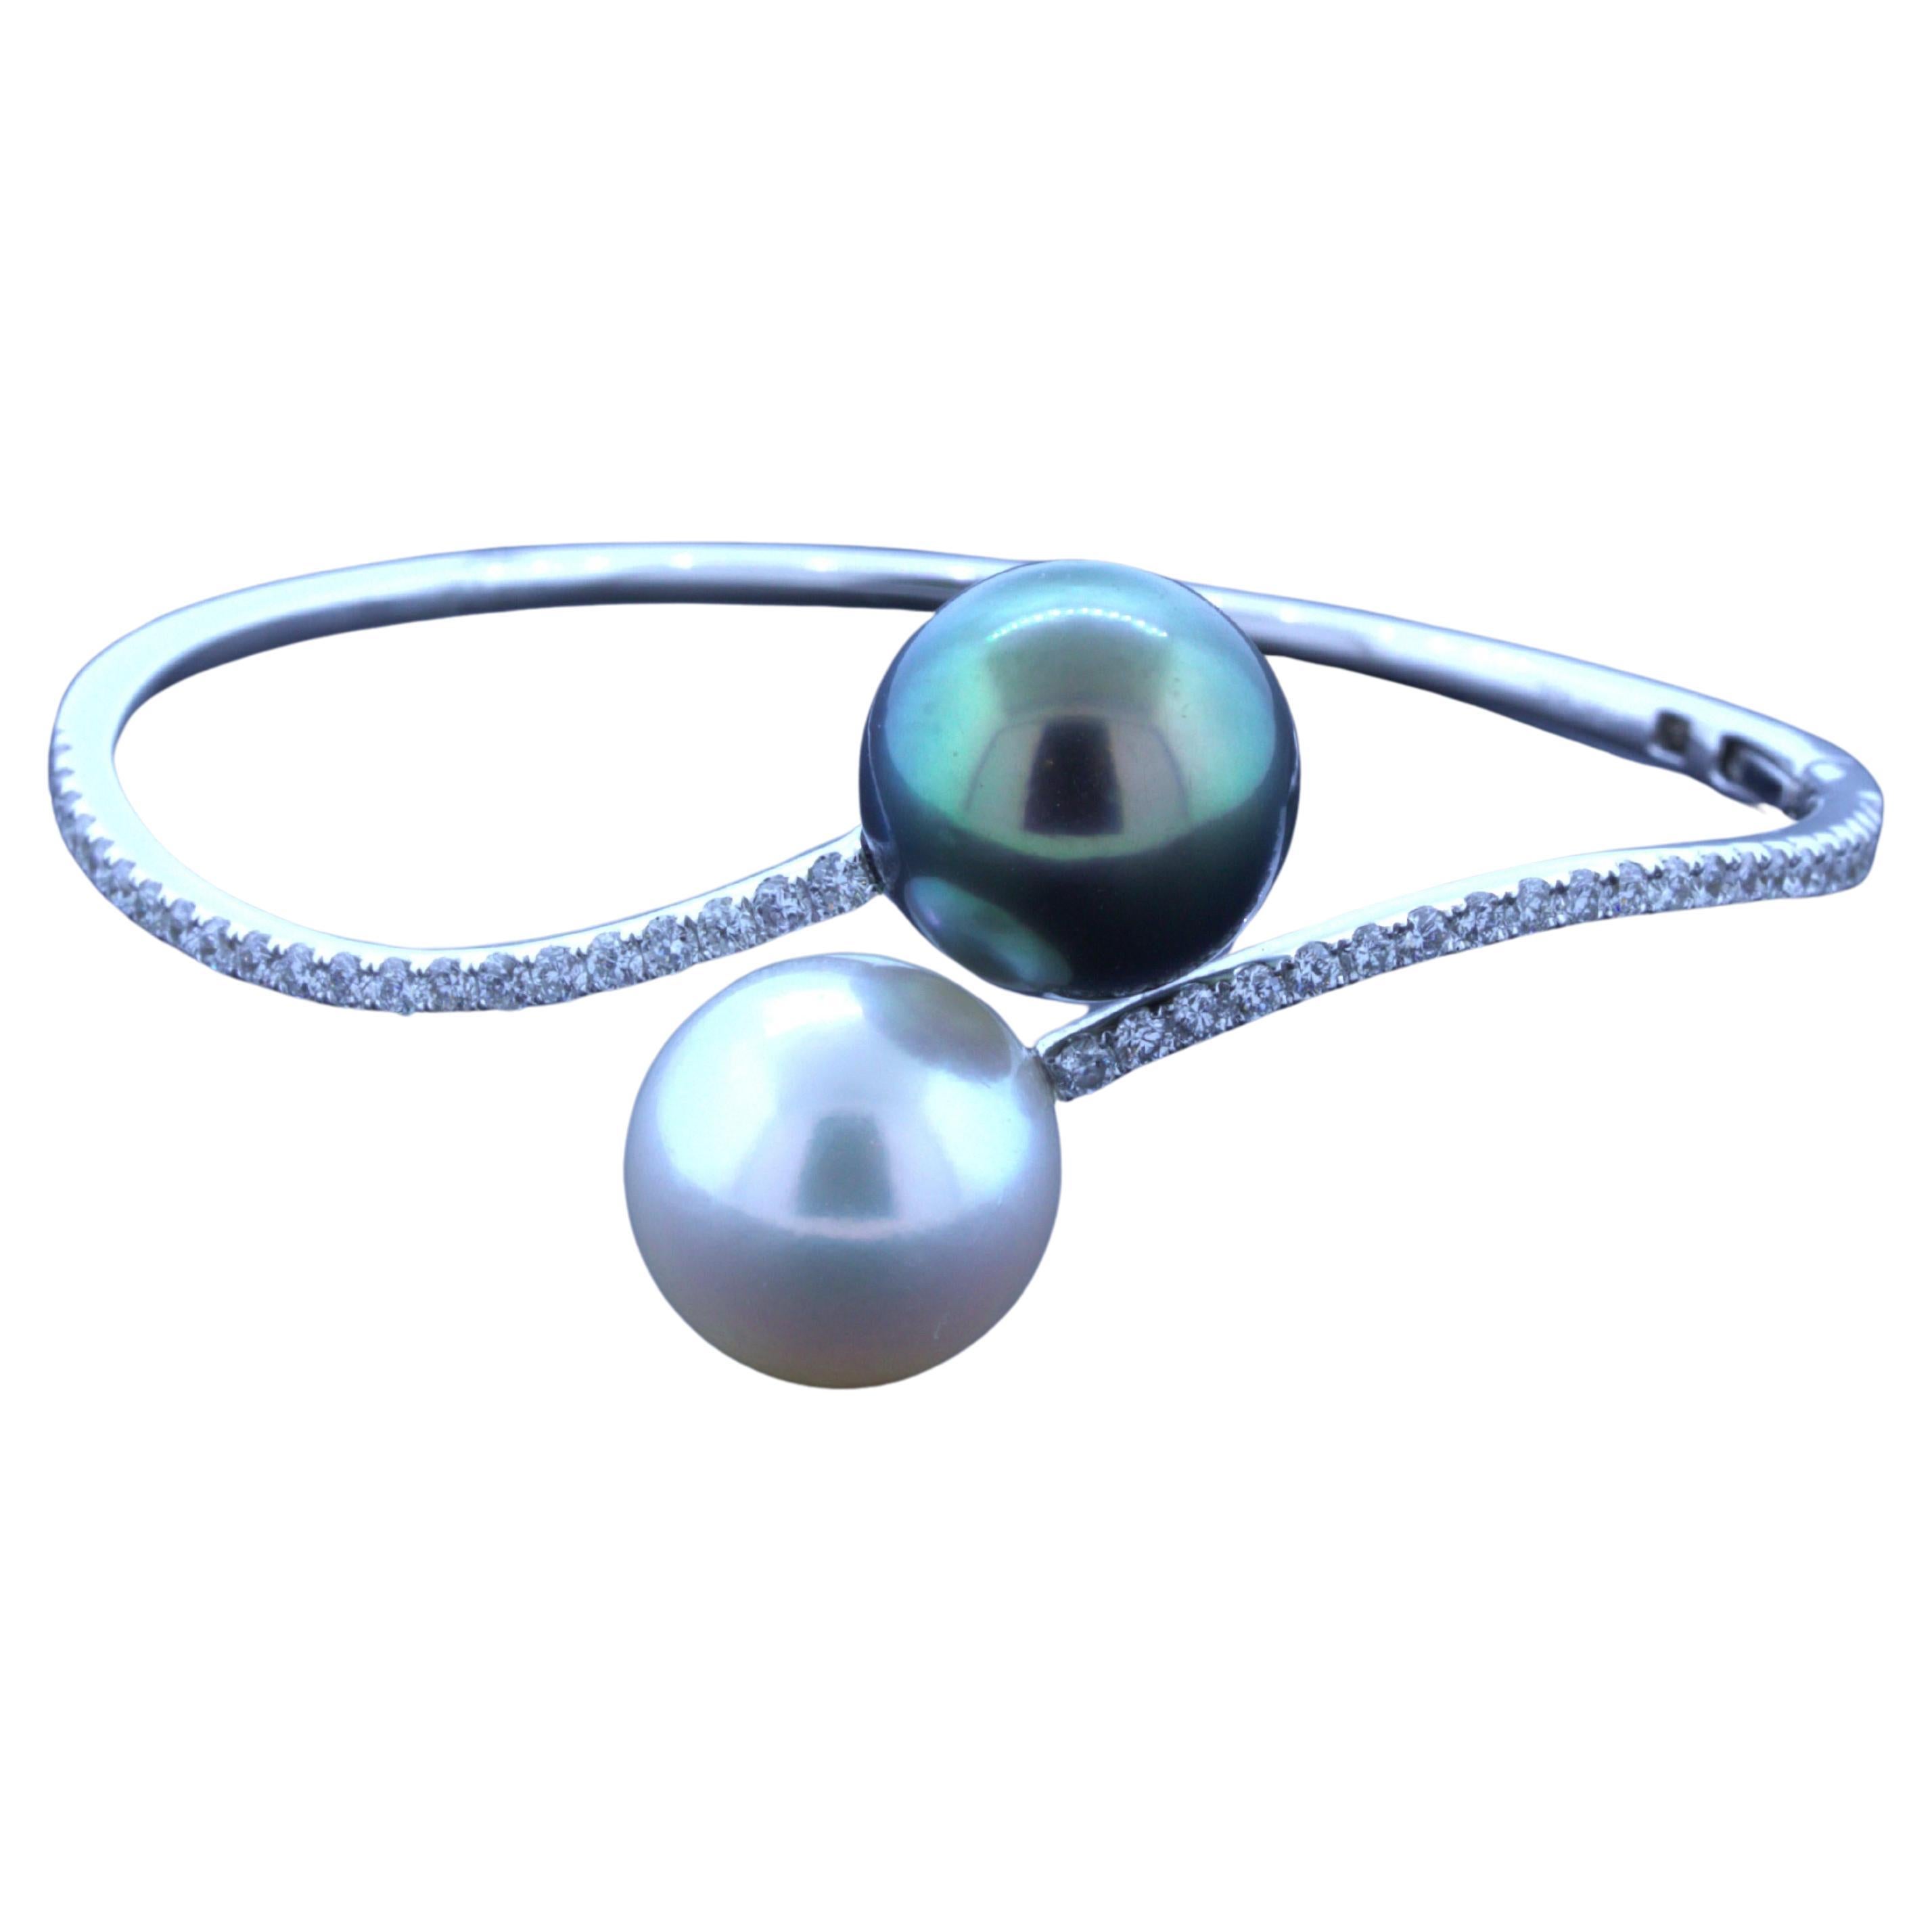 The best of both worlds! This lovely bangle bracelet has two super fine pearls, one South Sea while the other is Tahitian. They measure 13.5mm each and have excellent nacre quality and luster as the pearls glow in the light with a pink and pistachio